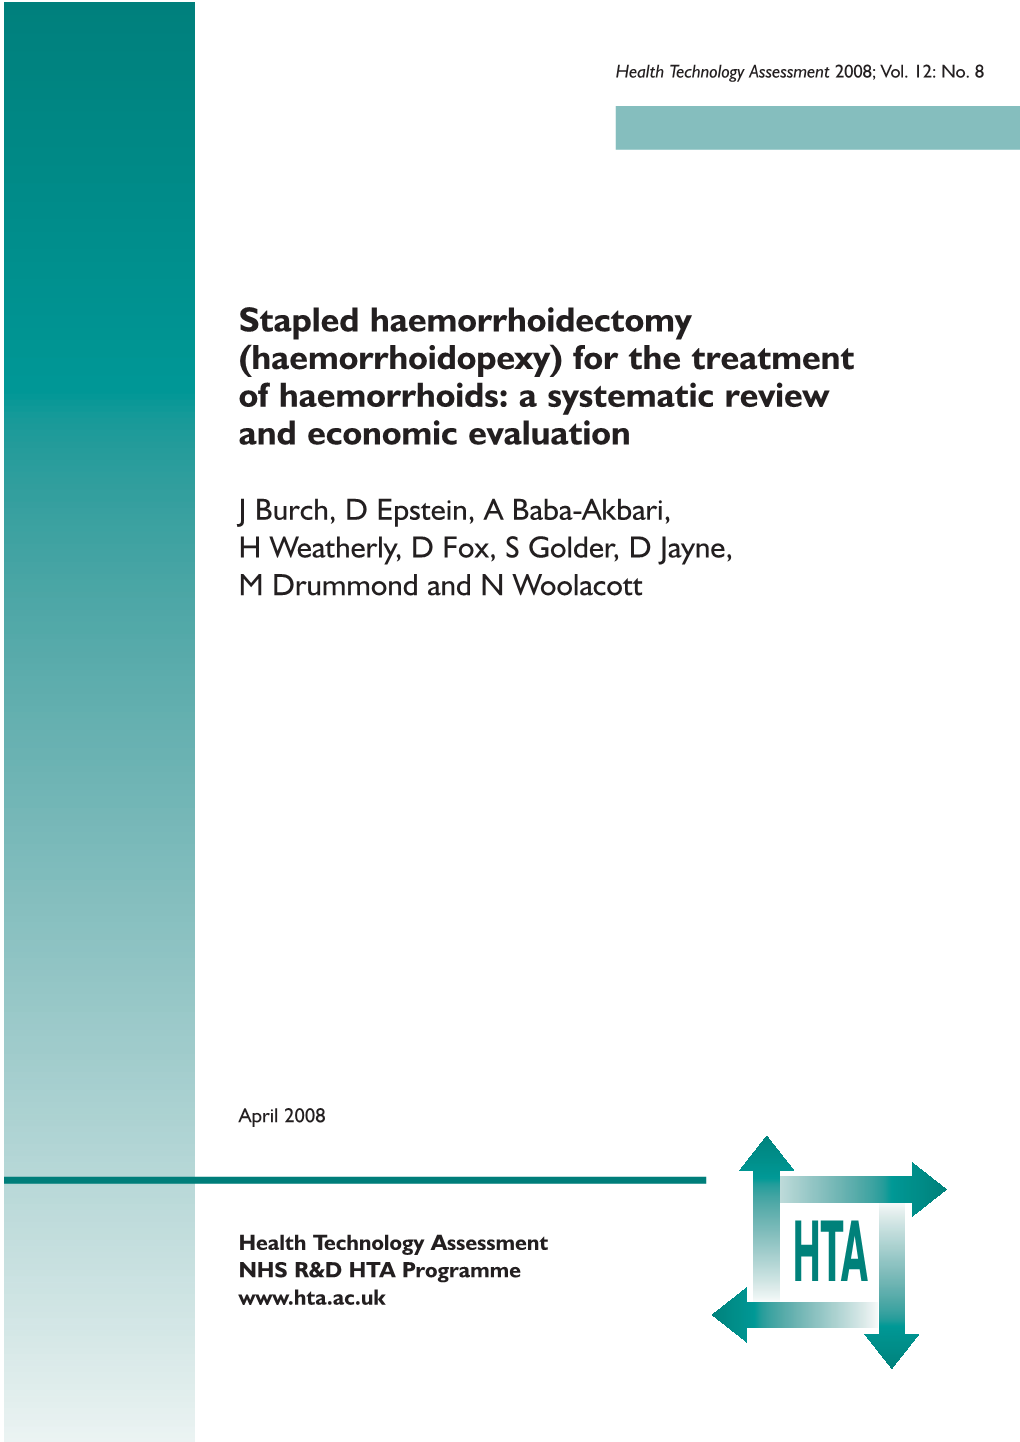 (Haemorrhoidopexy) for the Treatment of Haemorrhoids: a Systematic Review and Economic Evaluation